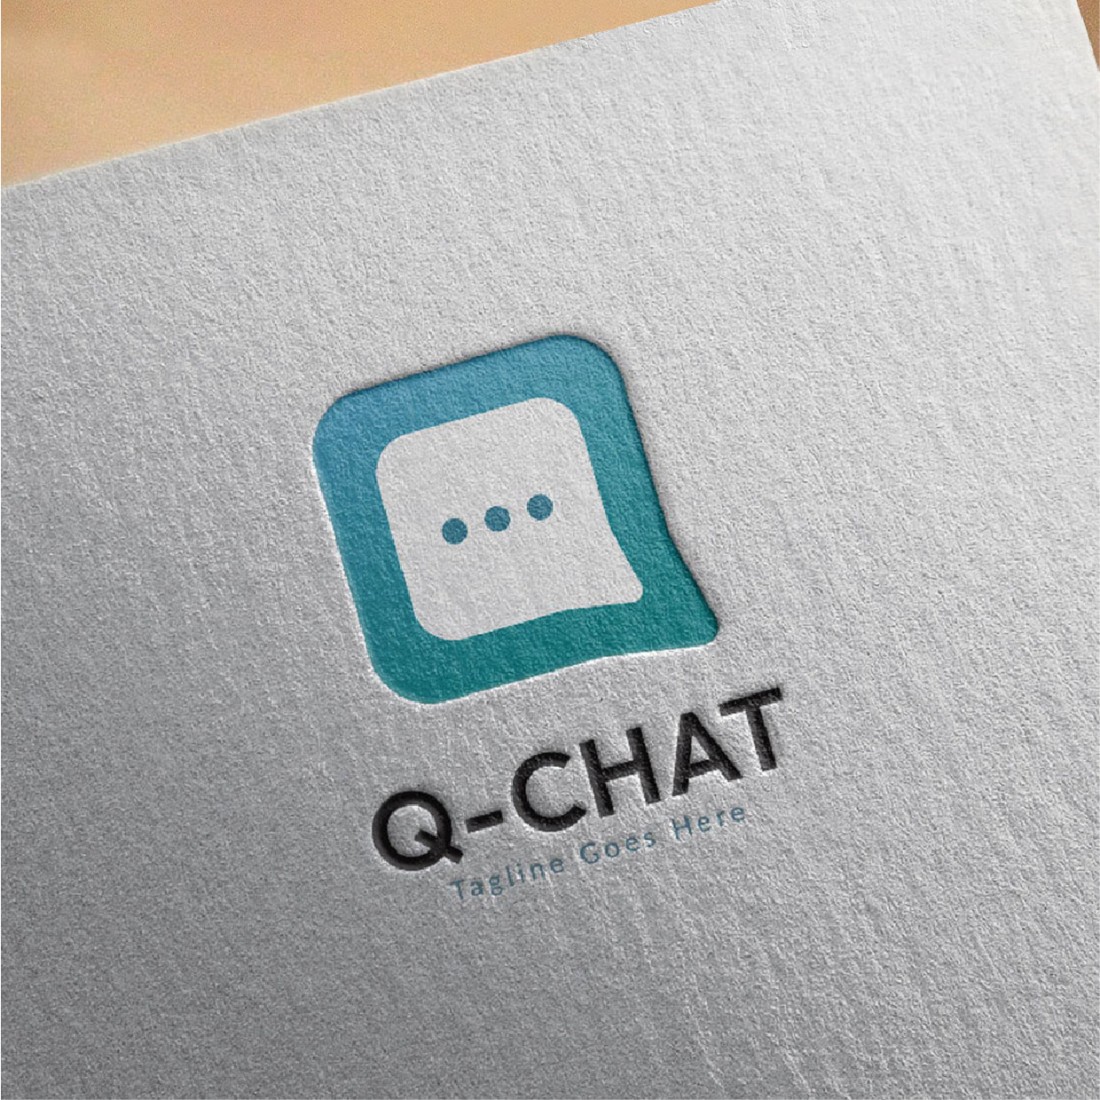 Q Chat Logo Template, Chat Logo Design preview image.